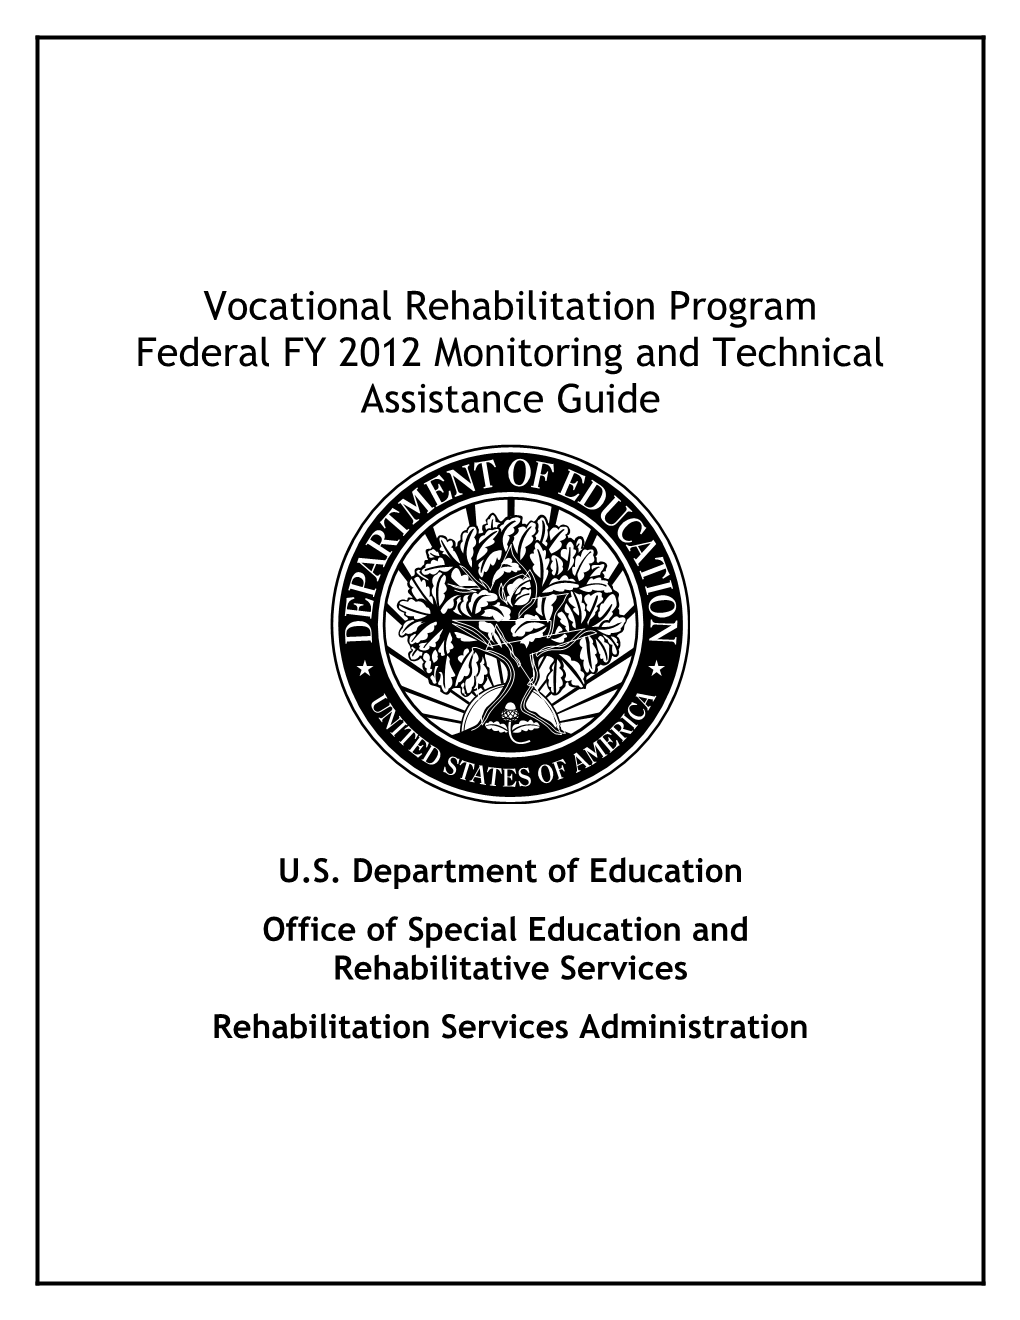 RSA Vocational Rehabilitation Programfederal FY 2012 Monitoring and Technical Assistance Guide